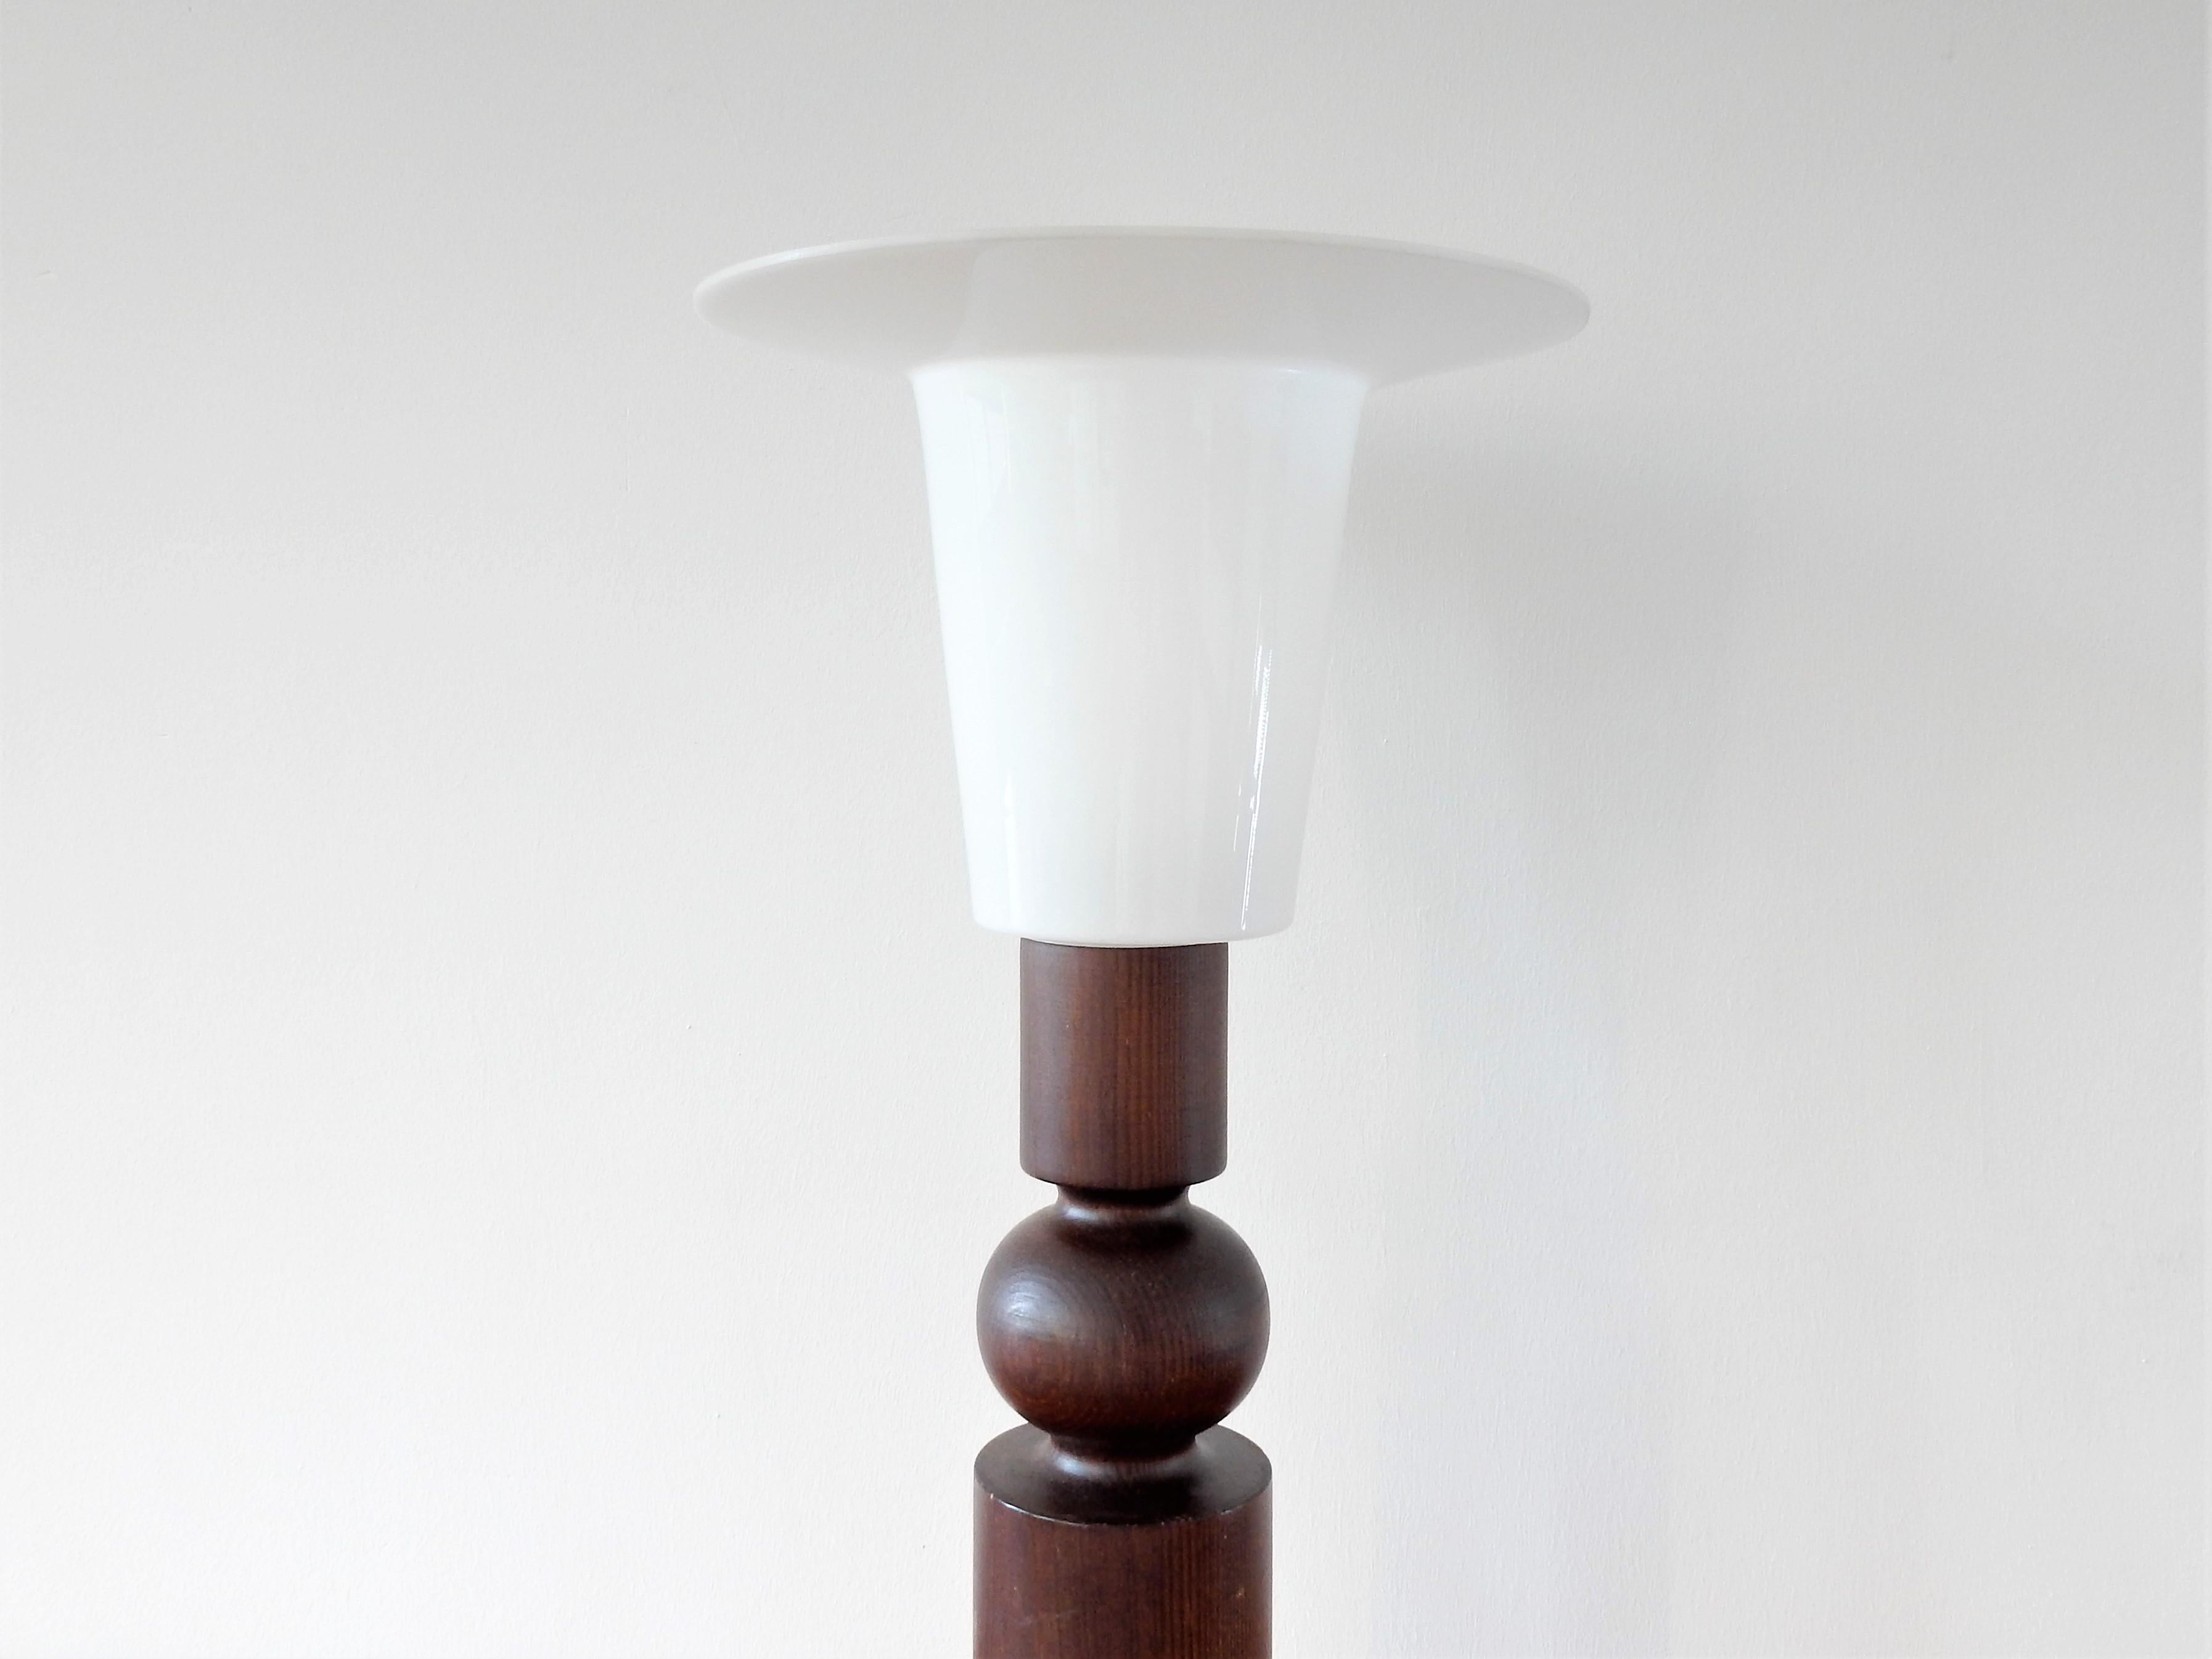 This table lamp was designed by Uno & Östen Kristiansson for Luxus in Sweden in the 1960s. We think this specific lamp was made in the late 1970s or early 1980s. It has an oak wooden base, labelled and punchmarked by Luxus and on top an acrylic